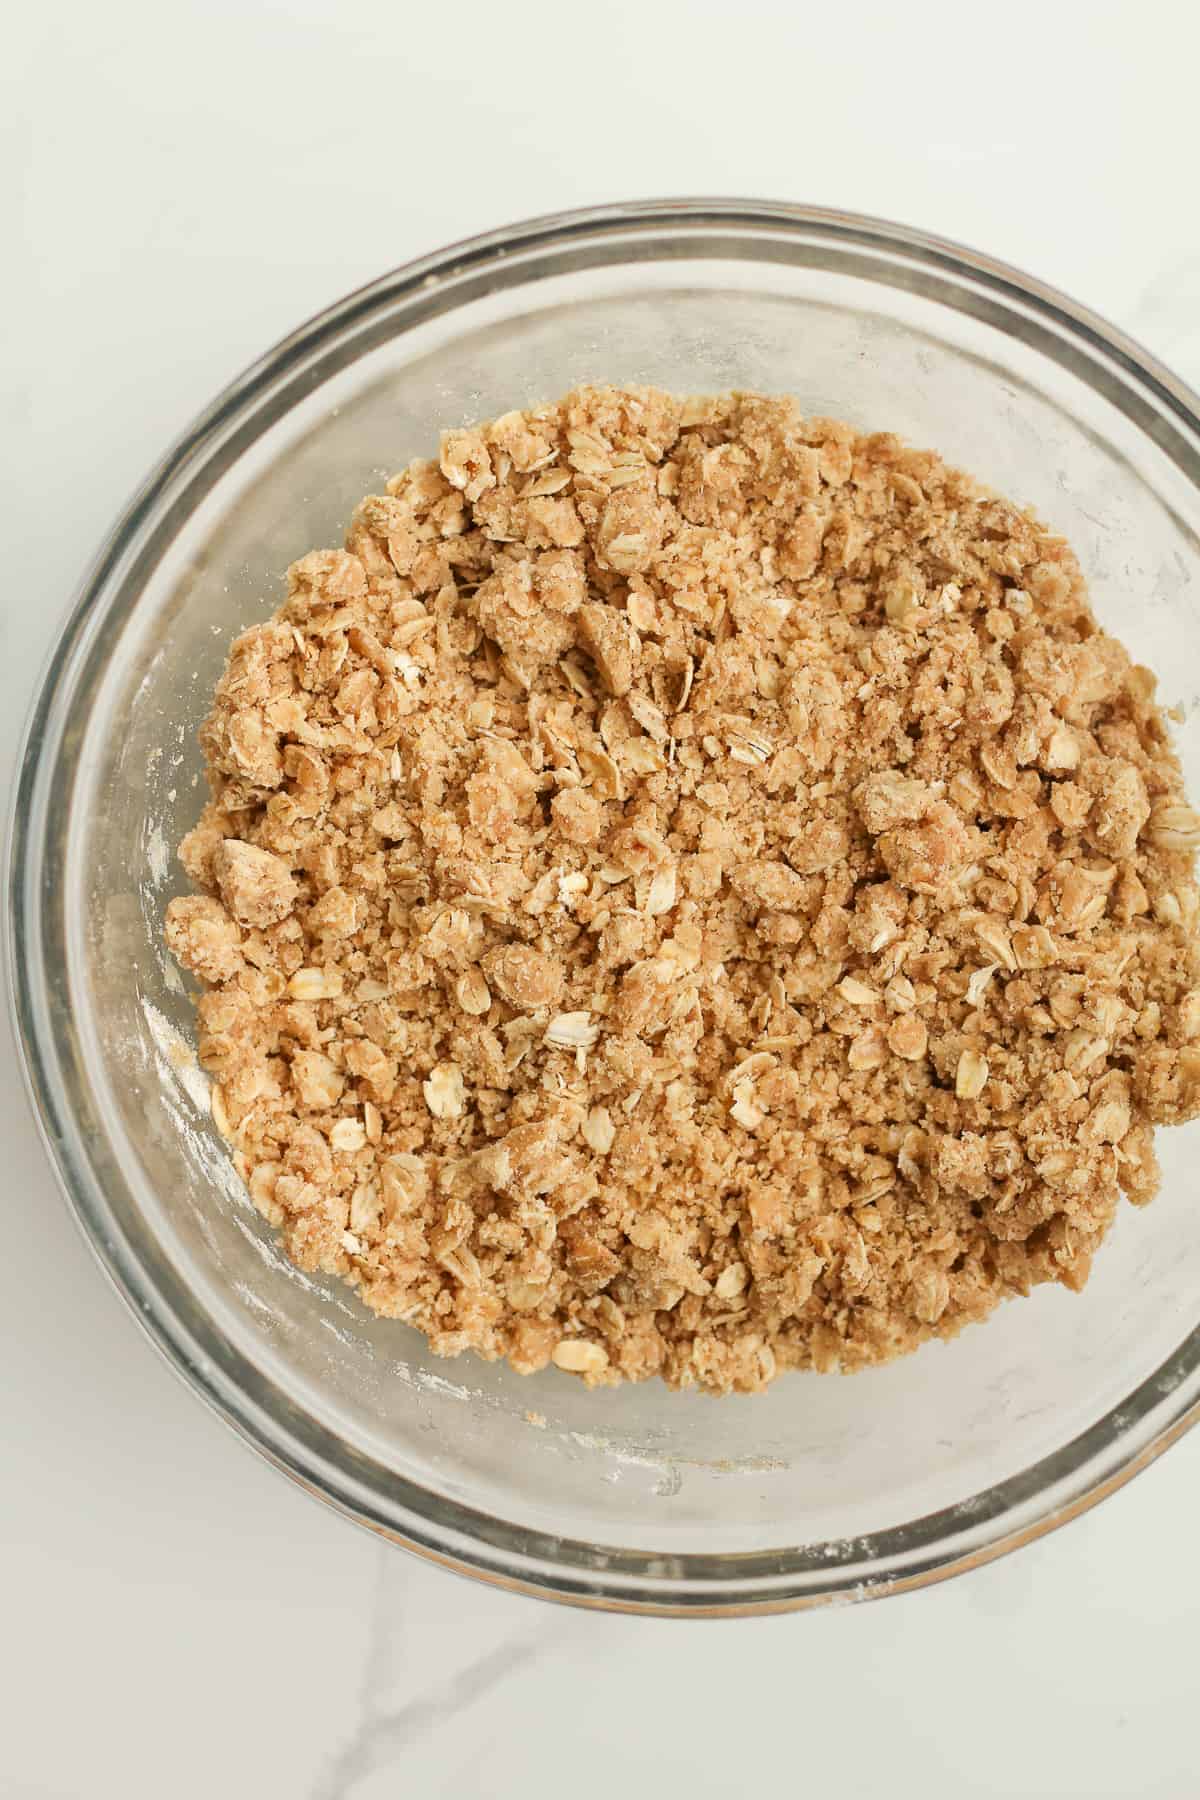 A bowl of the crumble mixture.